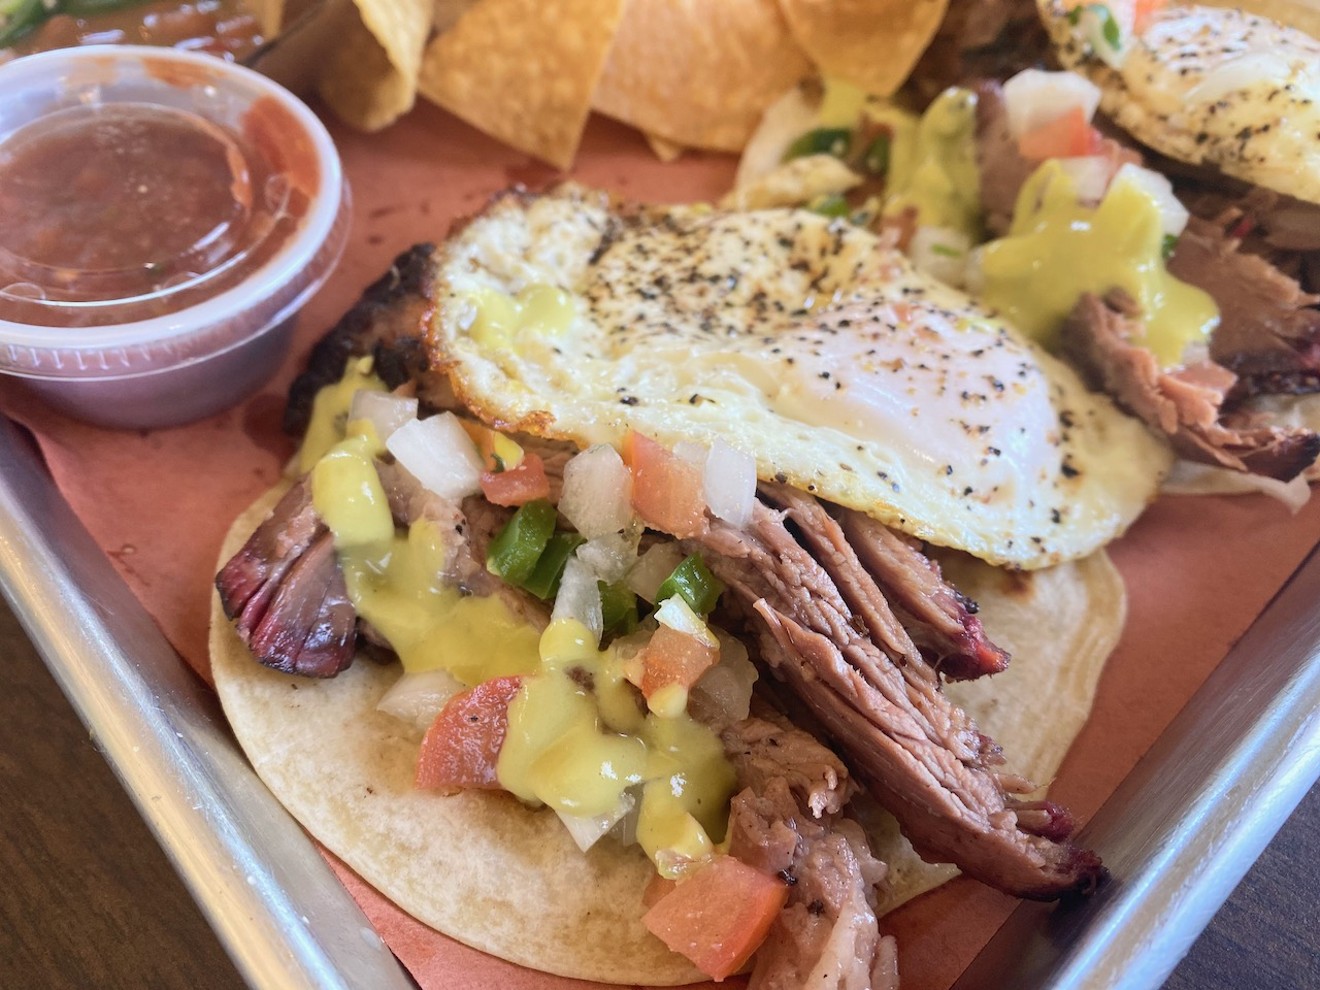 Brisket finds its way into many of the dishes at AG Texican.